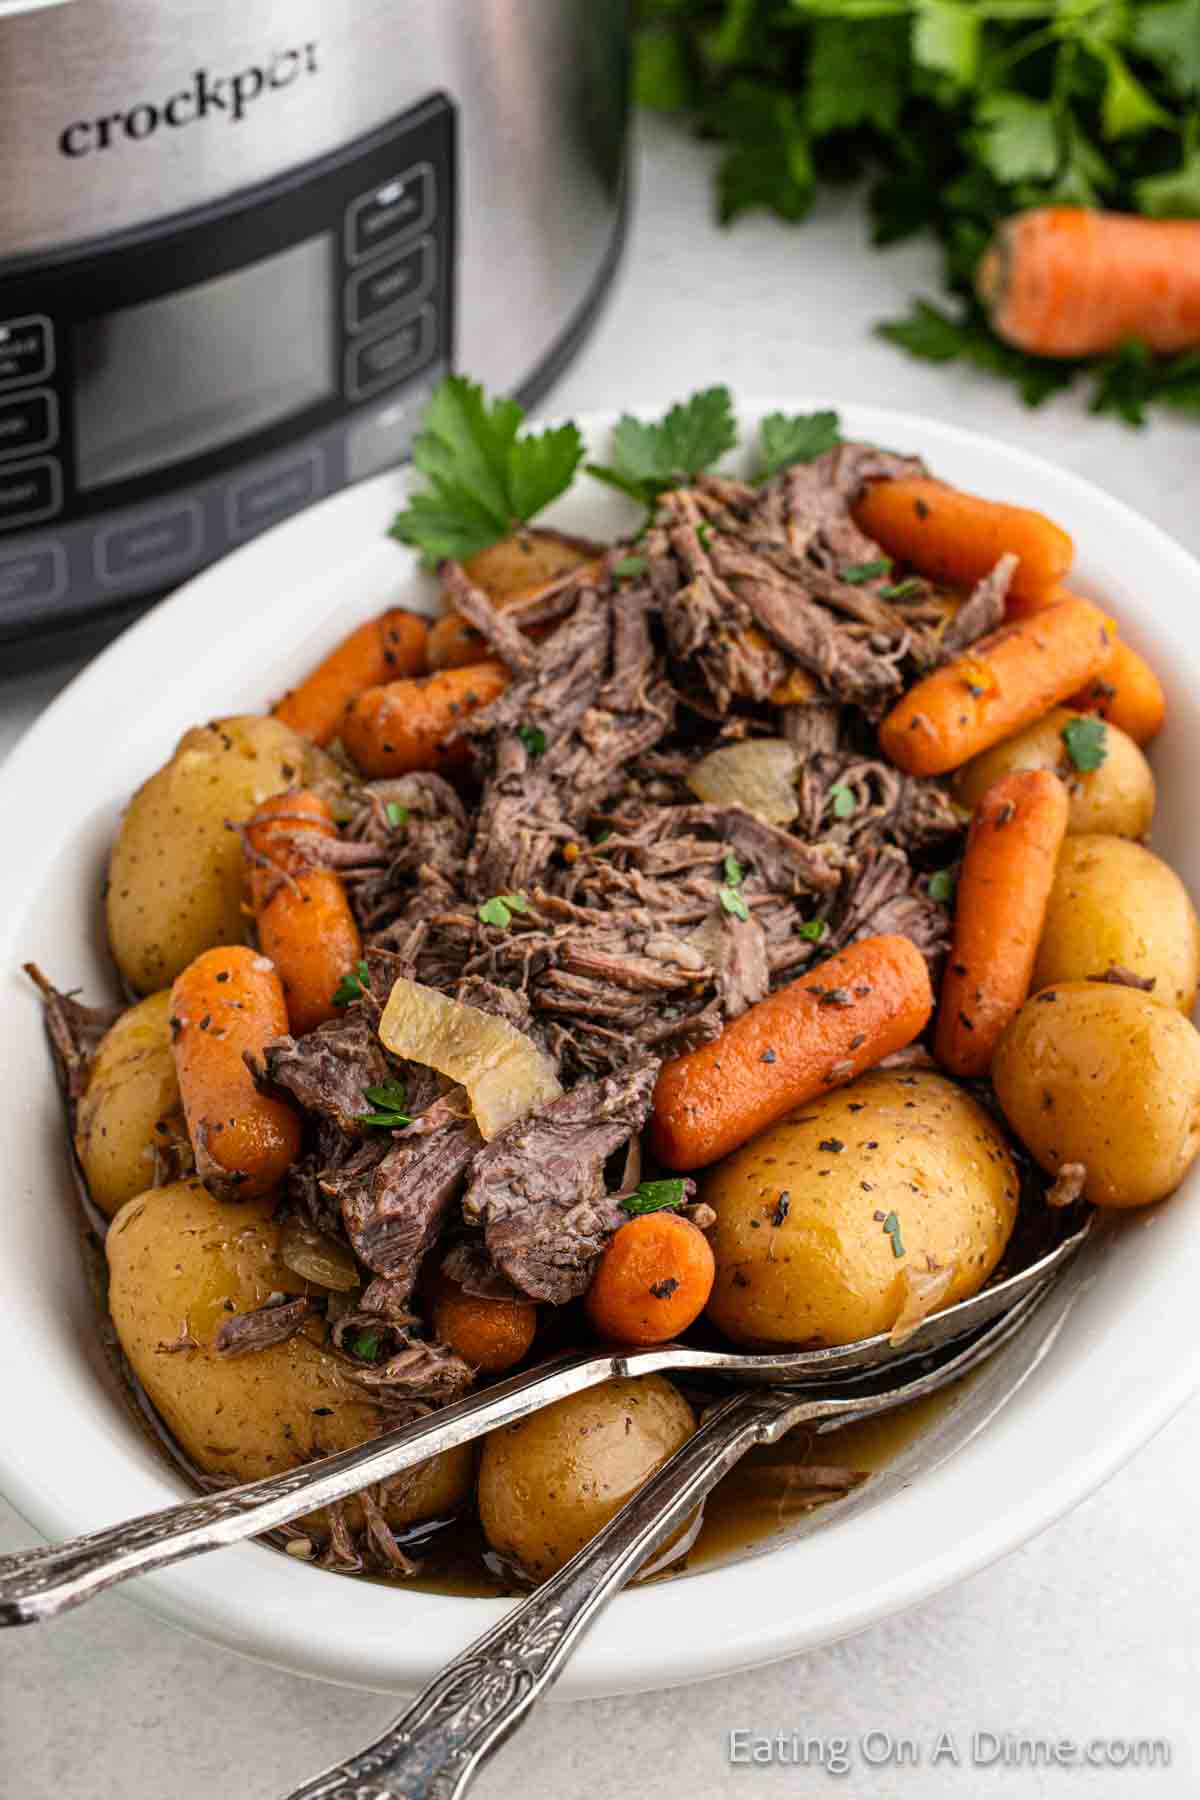 Shredded pot roast on a platter with potatoes and carrots